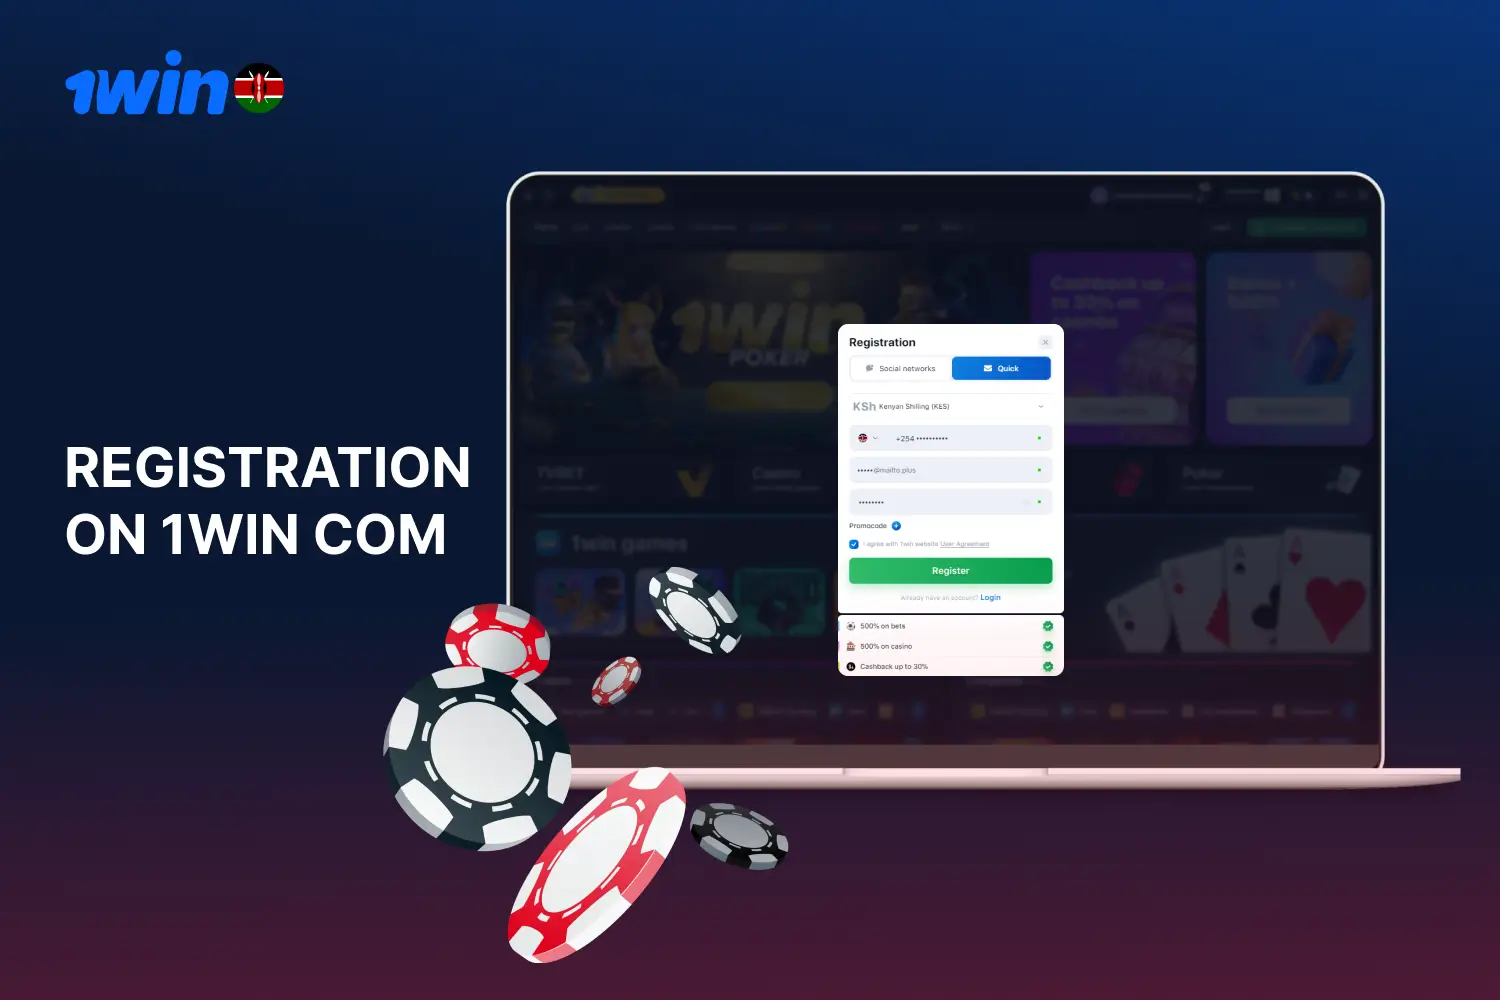 To get access to a lot of gambling games and nice bonuses from 1win Kenya, you need to register